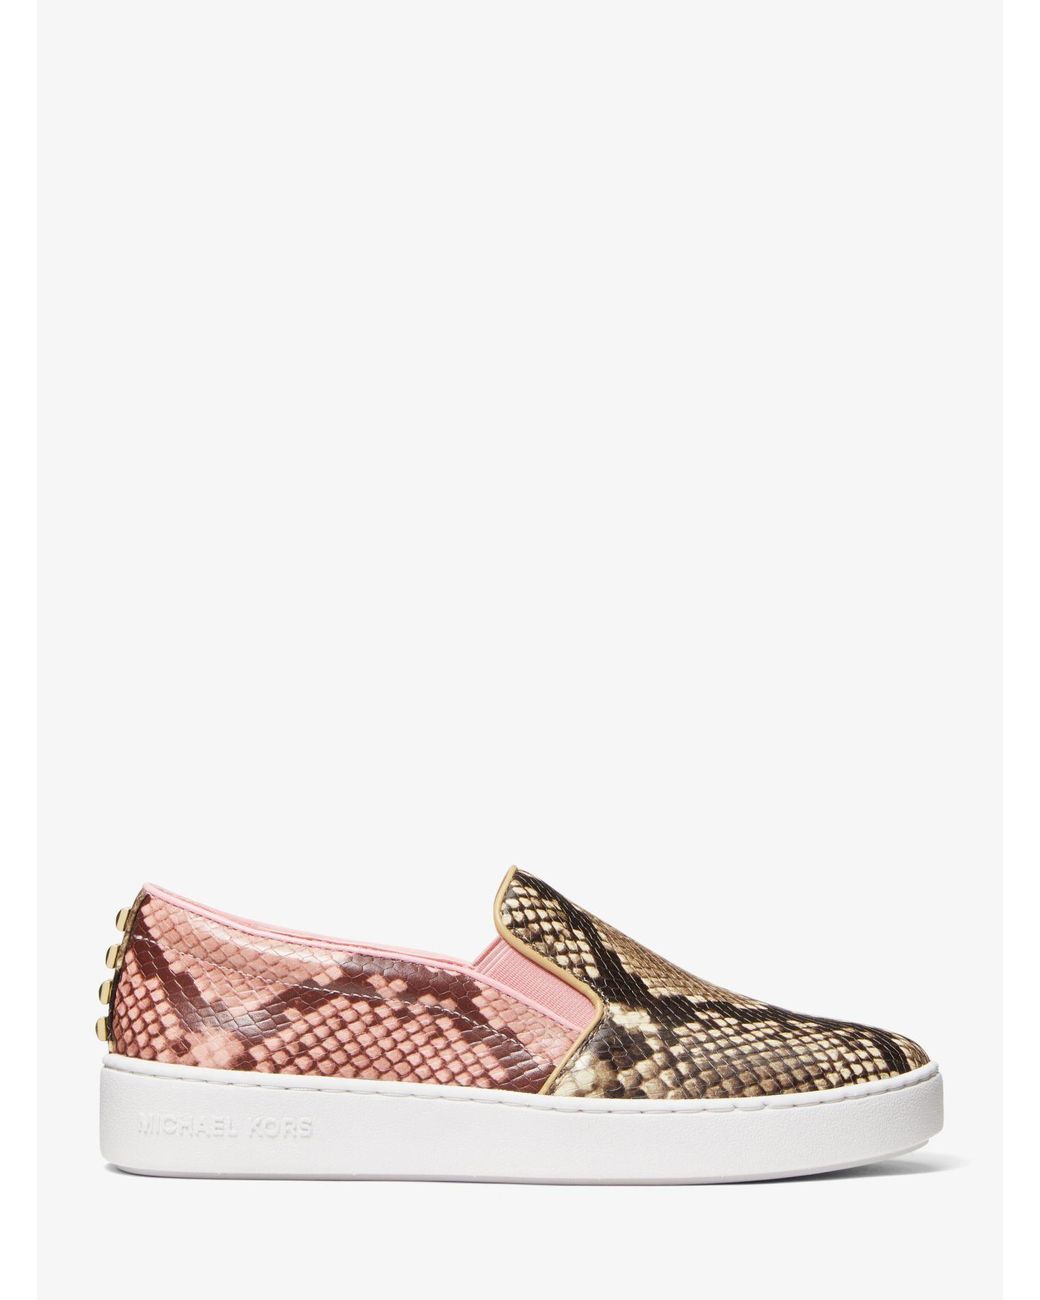 Michael Kors Keaton Studded Two-tone Python Embossed Leather Slip-on  Sneaker in Shell Pink (Pink) - Lyst